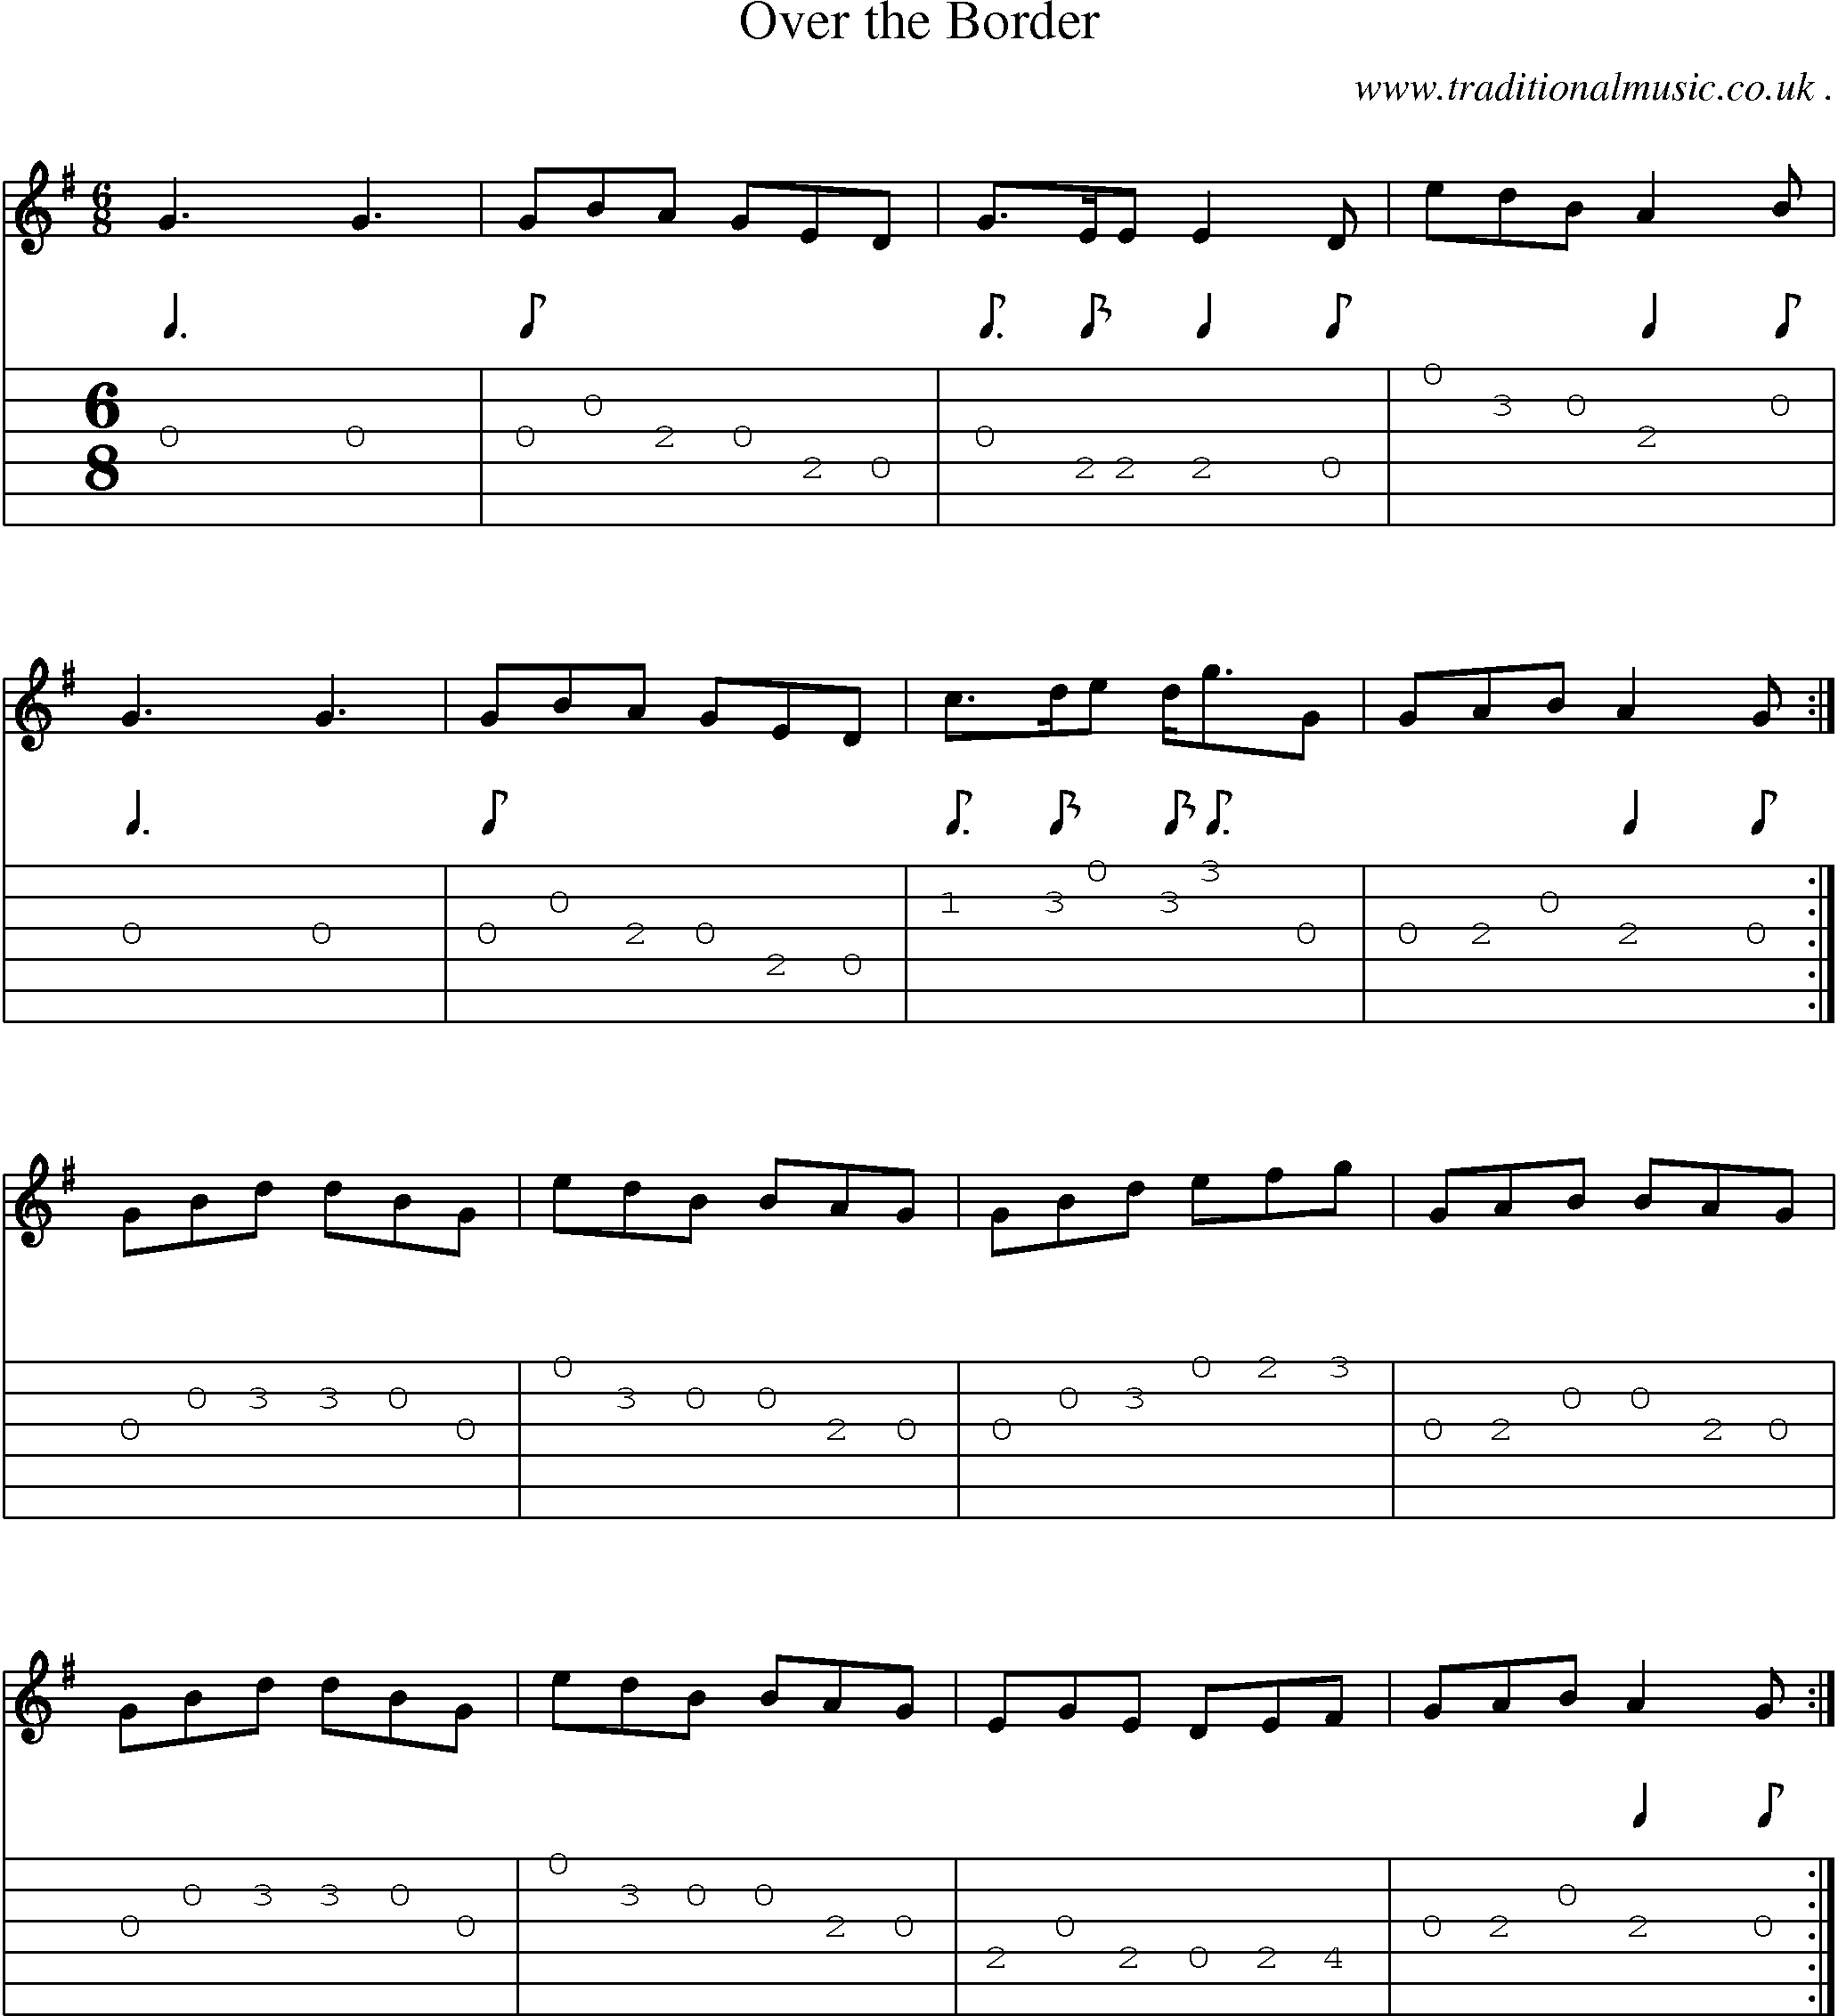 Sheet-music  score, Chords and Guitar Tabs for Over The Border